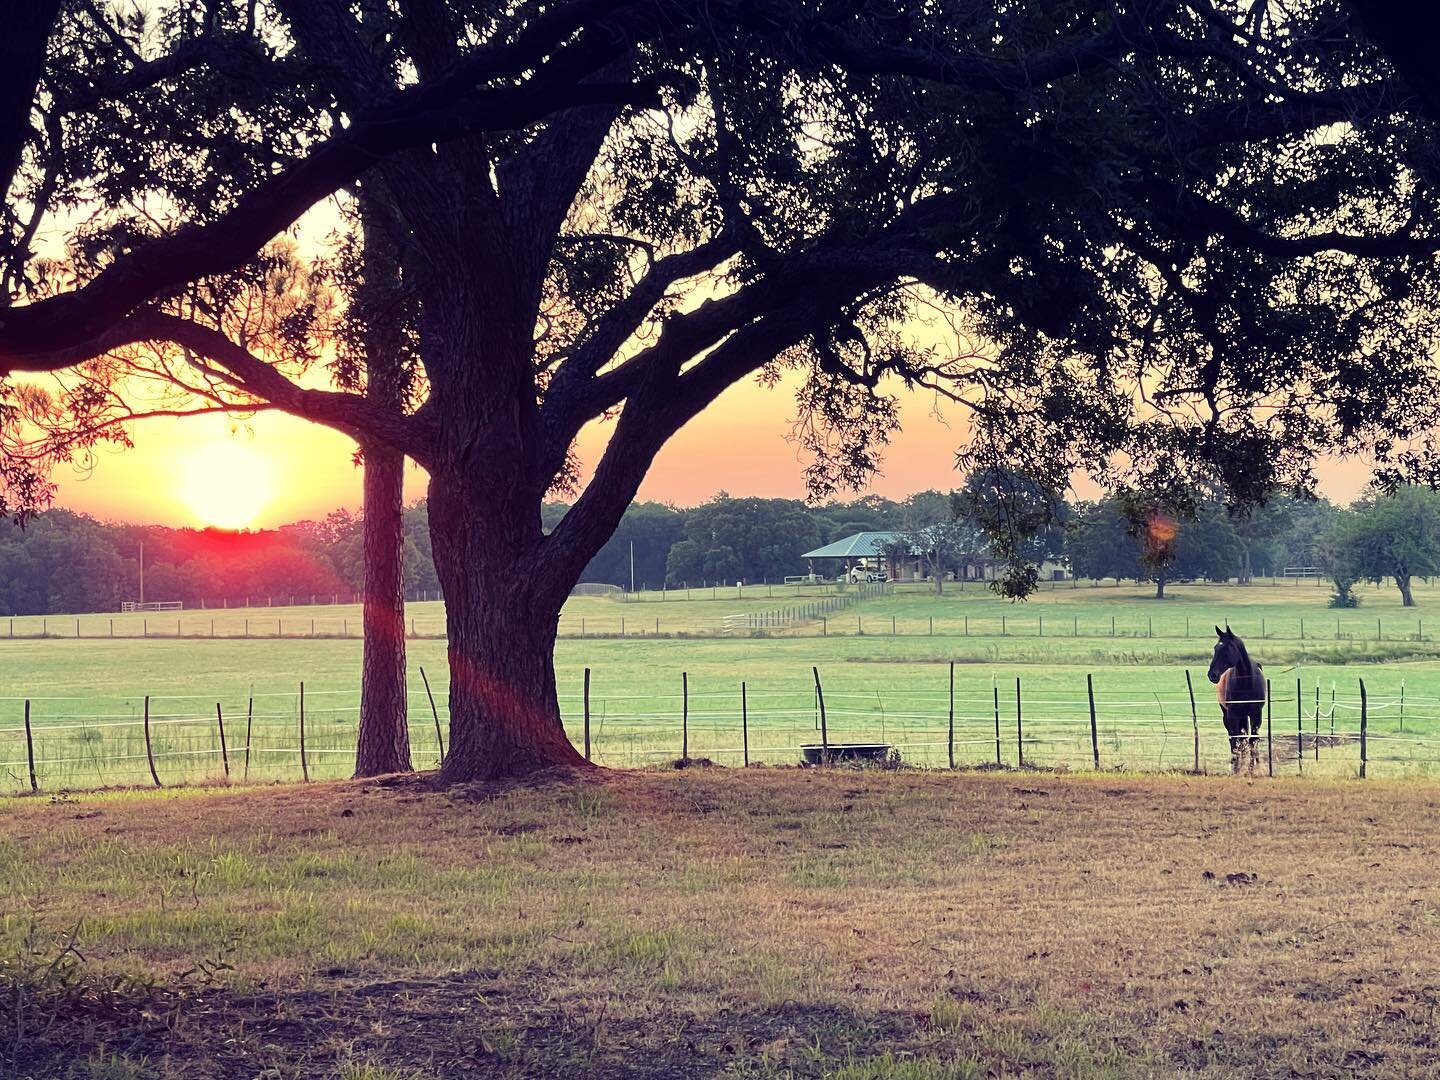 Good morning. Are you ready to ride?

#sunrise #horse #warmbloodsofinstagram